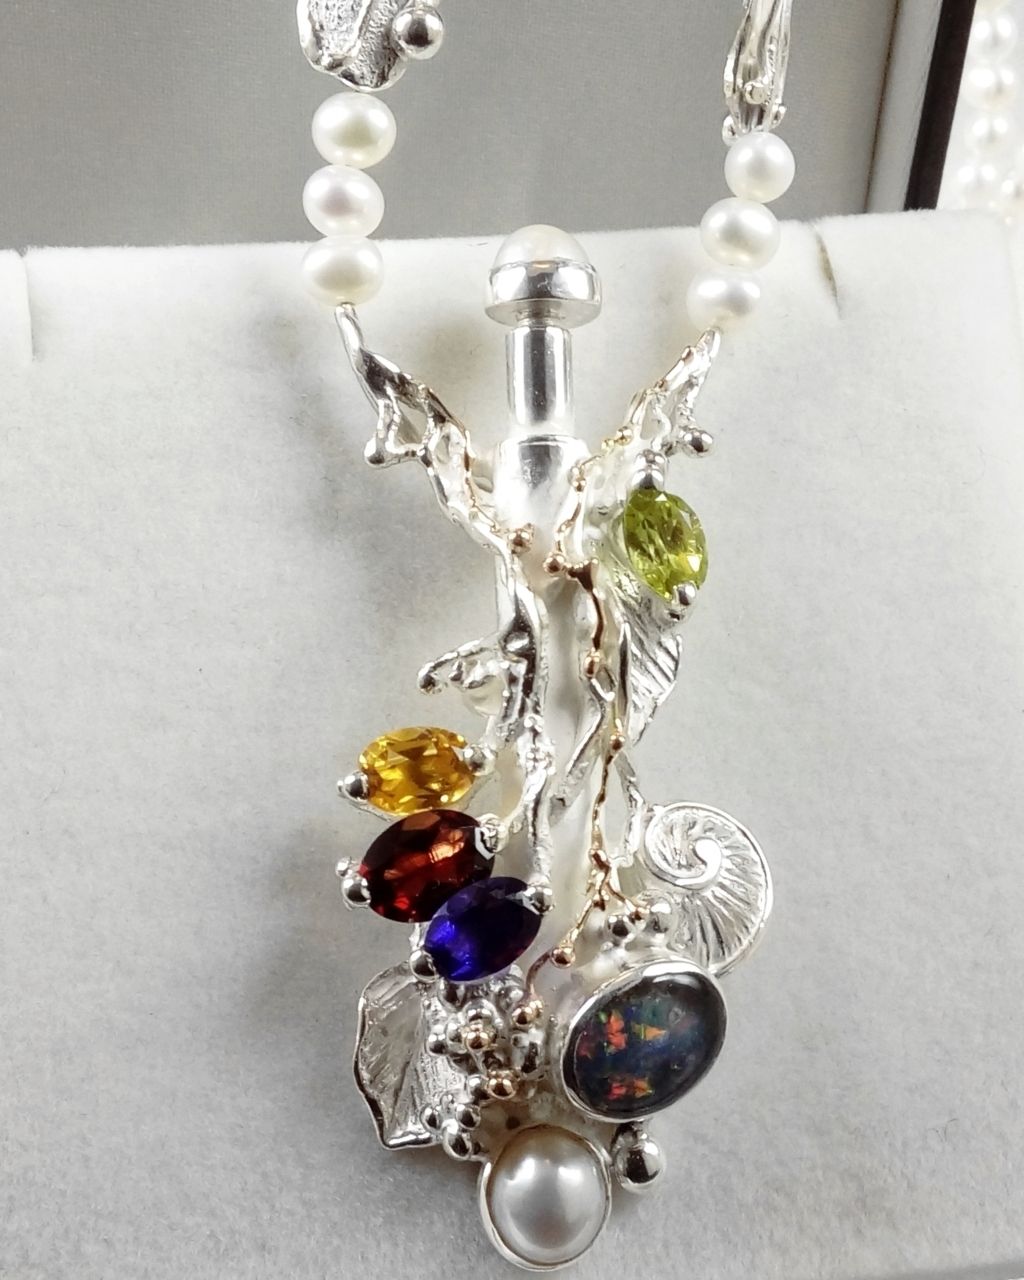 gregory pyra piro perfume bottle pendant #4401, handcrafted jewelry in silver with stones, retro handcrafted jewelry, silver and gold jewelry with gemstones for women, gold and silver jewelry with natural pearls and gemstones, jewellery handcrafted by artisan, jewellery handcrafted from gold and silver, perfume bottle made from silver and gold, perfume bottle with pearls, perfume bottle pendant, jewellery with opal and gemstones, pendant with amethyst and garnet, pendant with citrine and garnet, necklace with pearls and faceted gemstones, necklace with pearls and opal